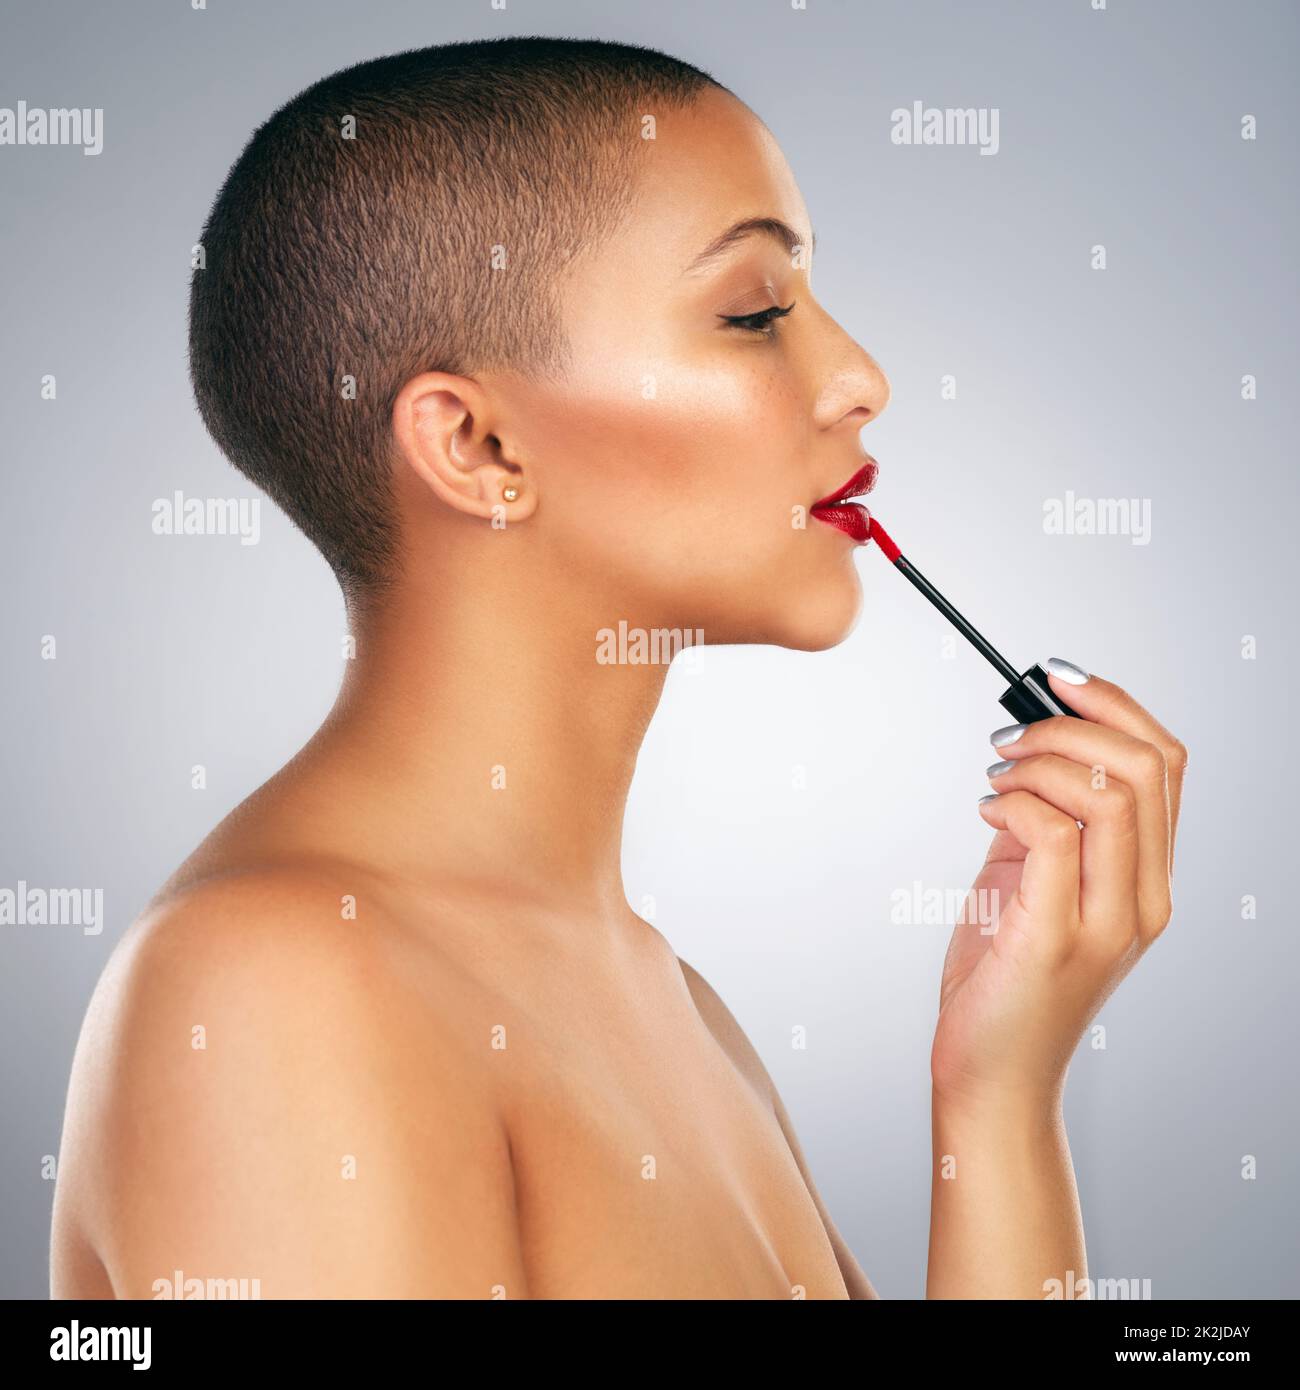 I like my lips bold. Studio shot of a beautiful young woman applying red lipstick against a grey background. Stock Photo